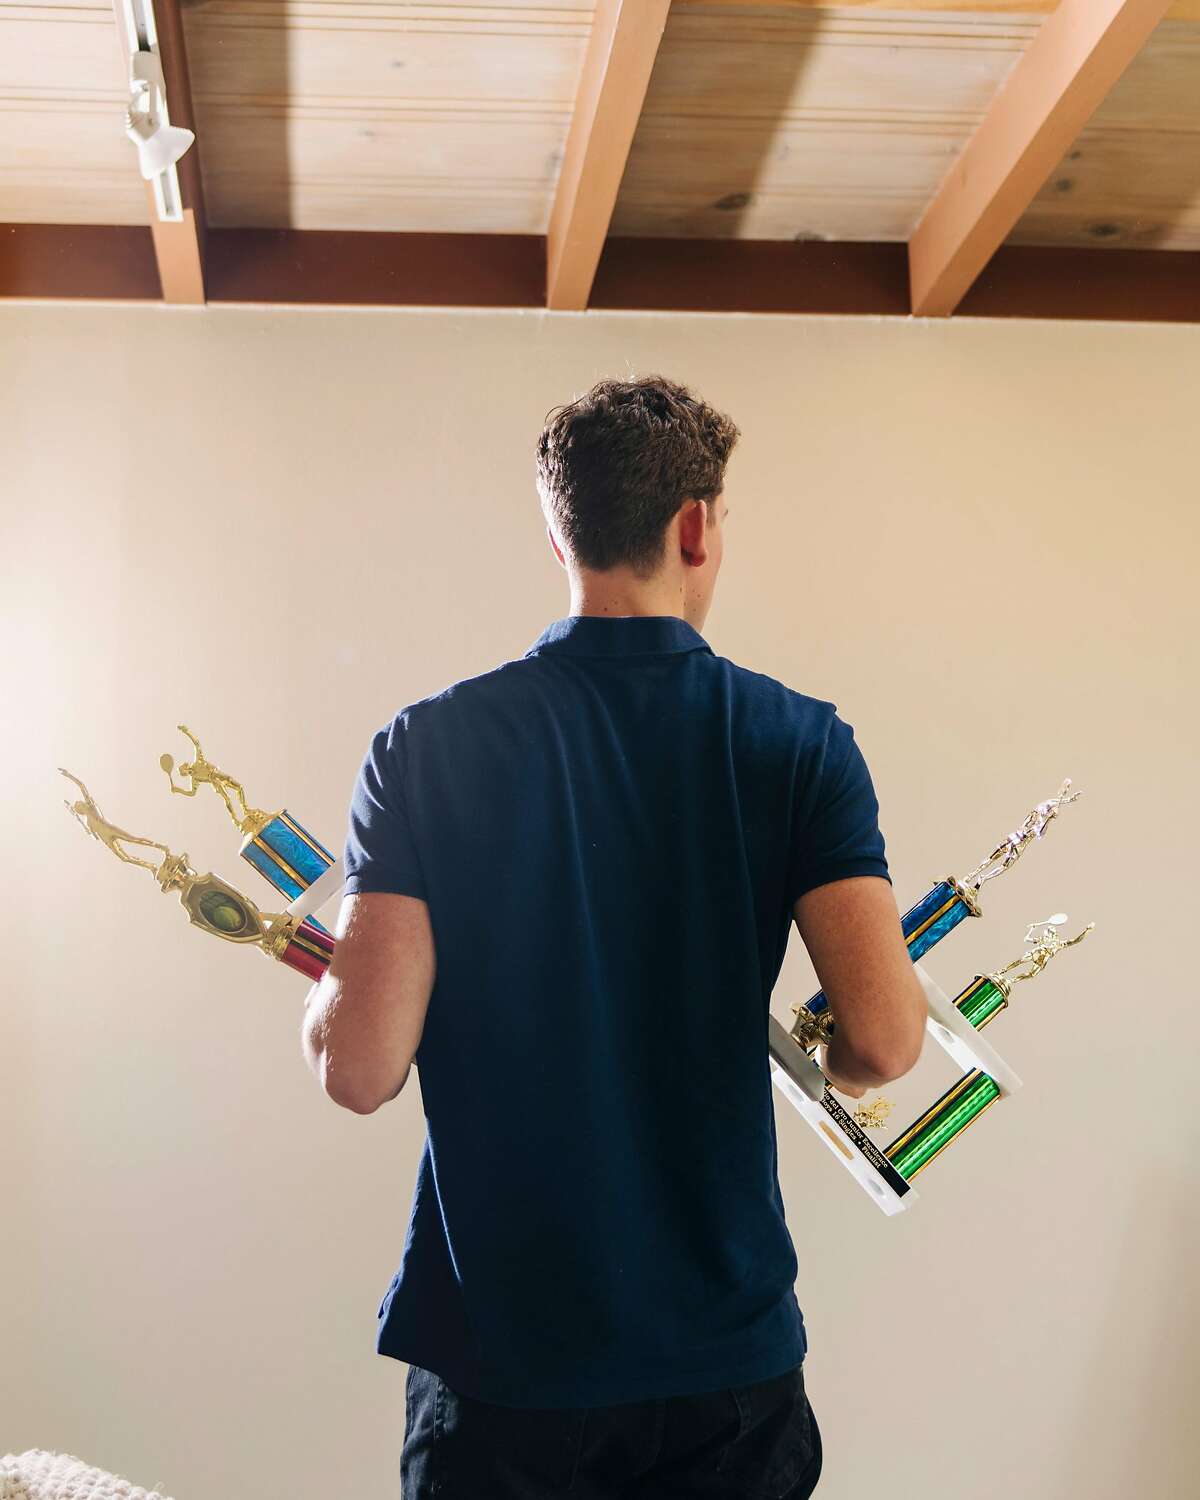 Stevie Gould and his tennis trophies in Marin County, Calif., Feb. 15, 2020. The United States Tennis Association has asserted it can police itself when it comes to abuse cases, but the story of one coach in California raises doubts. (Cayce Clifford/The New York Times)